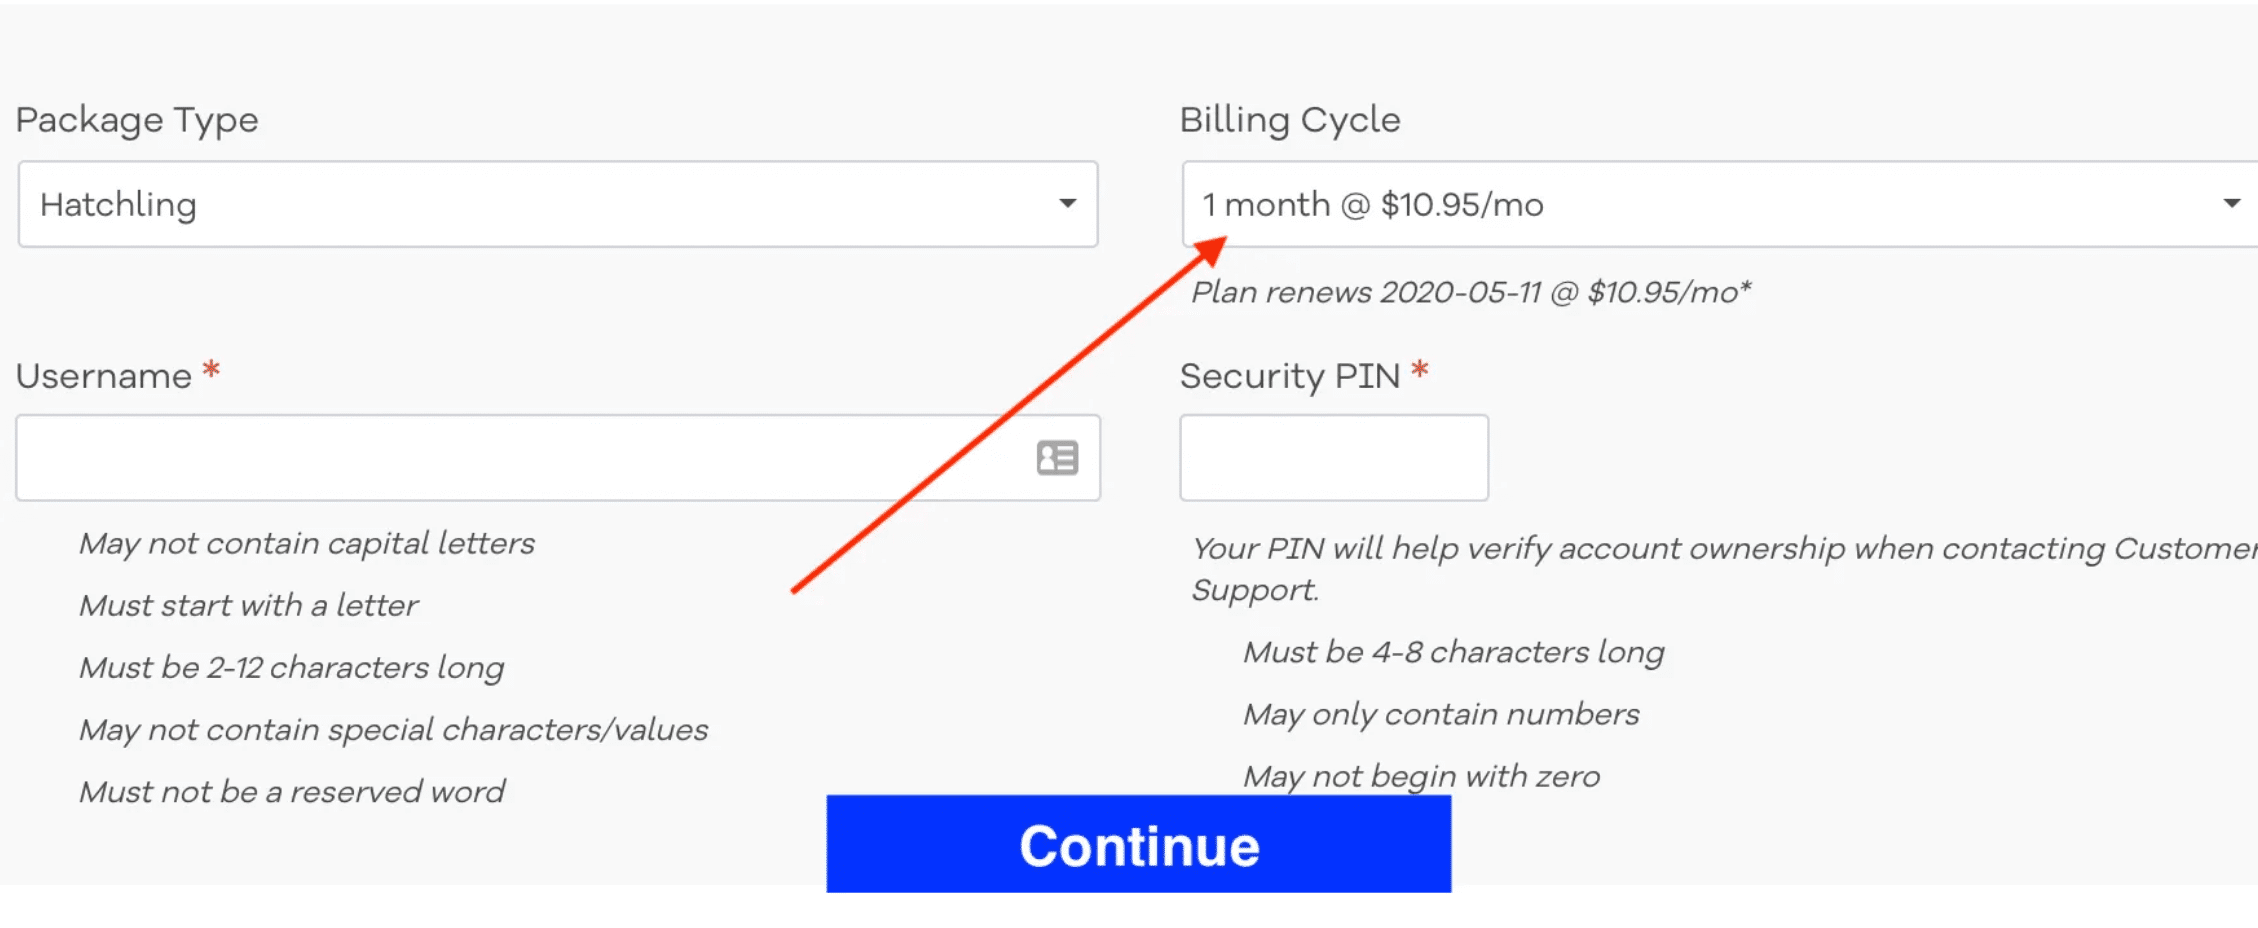 An example of a monthly billed web hosting